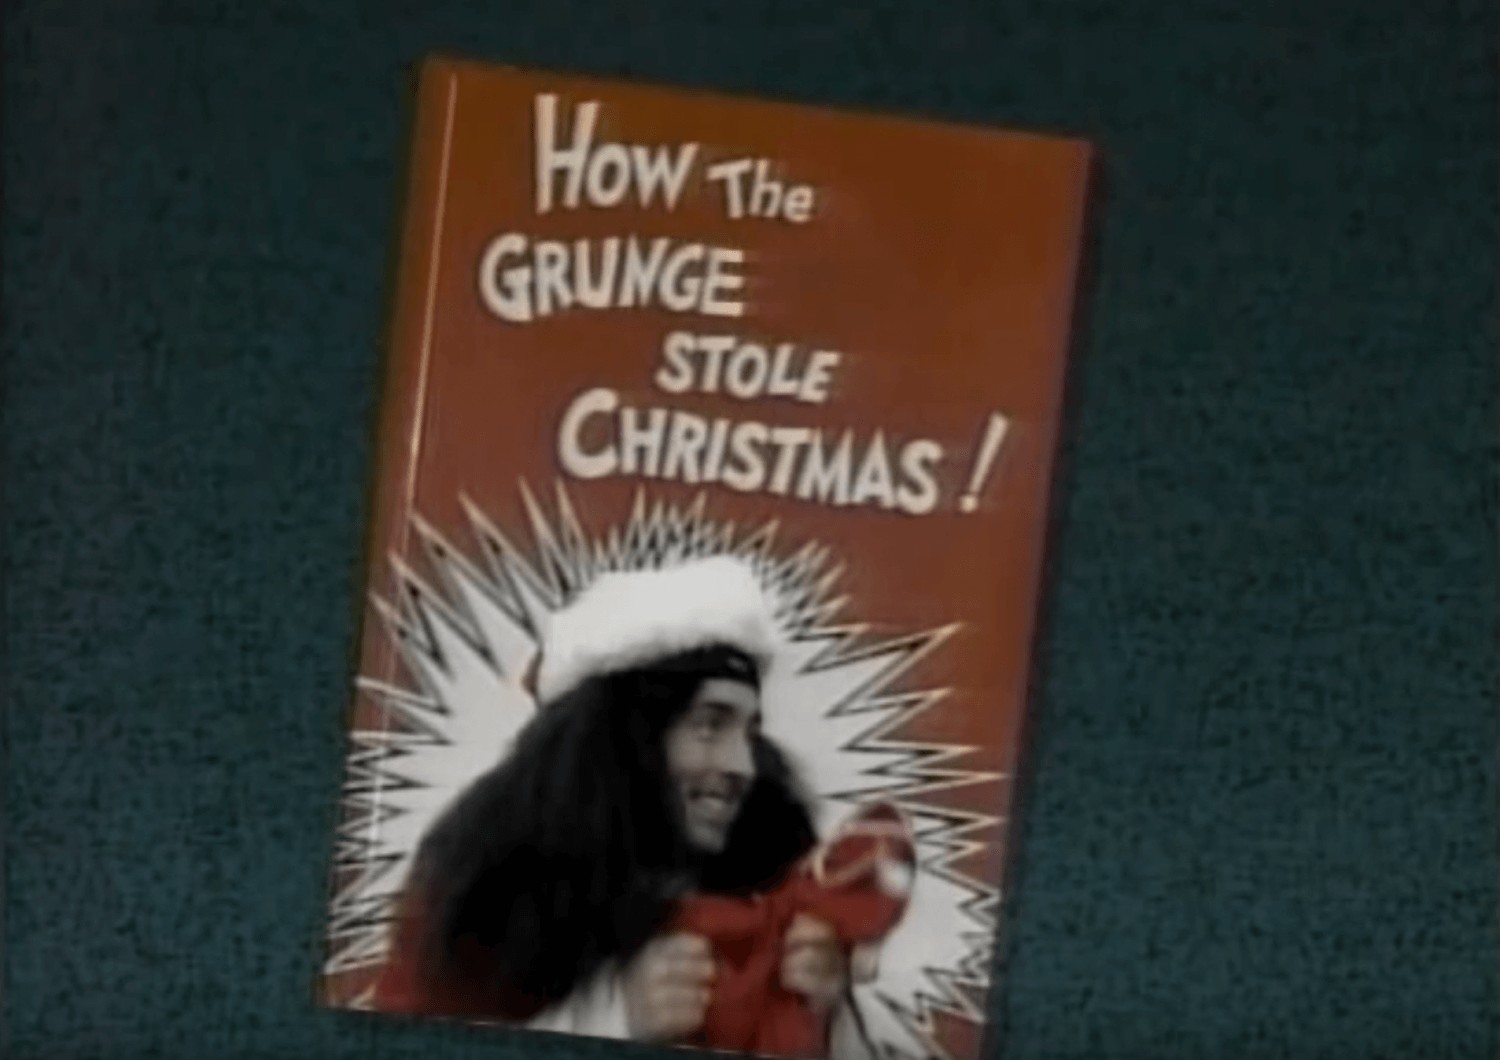 How the Grunge Stole Christmas Almost Live